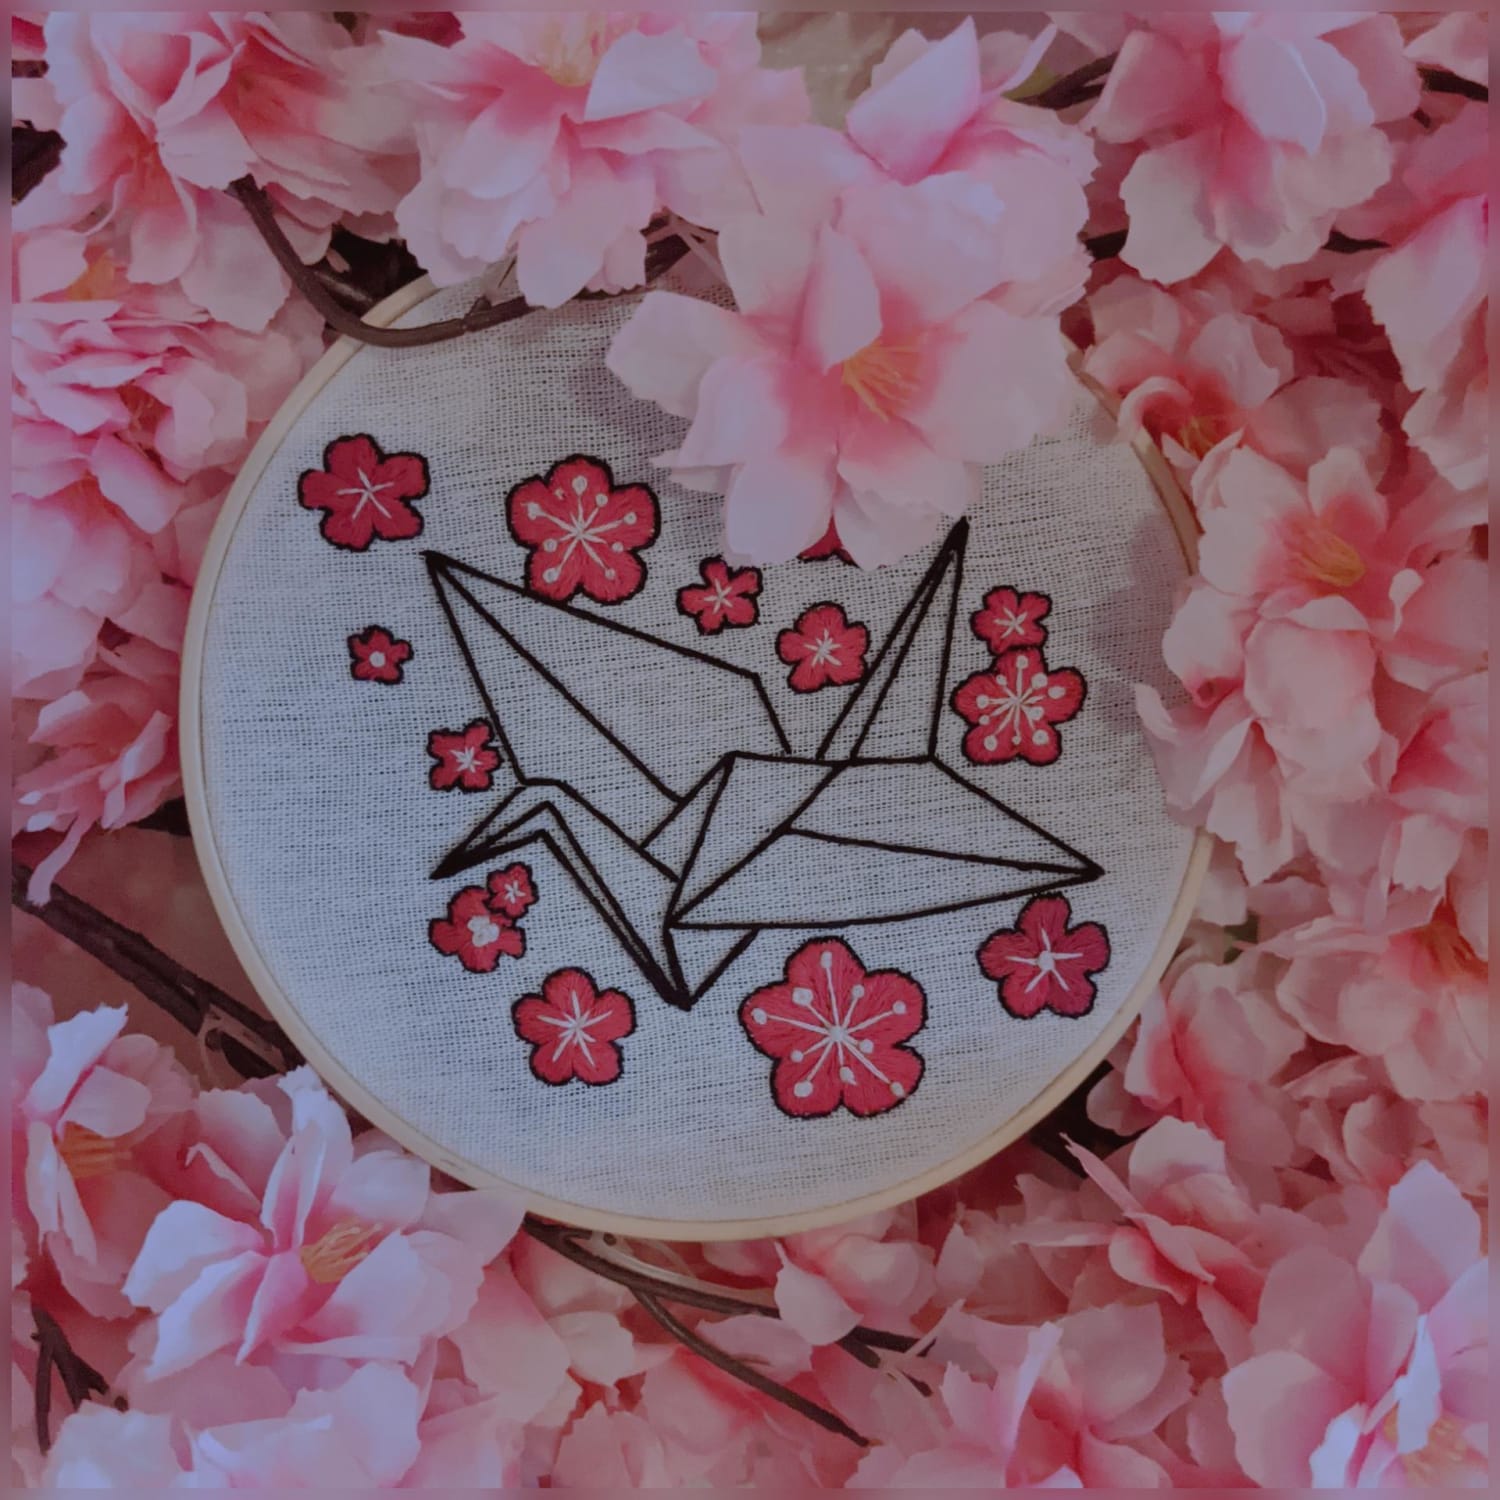 Paper Crane w/ plum blossoms, house warming gift for a friend.